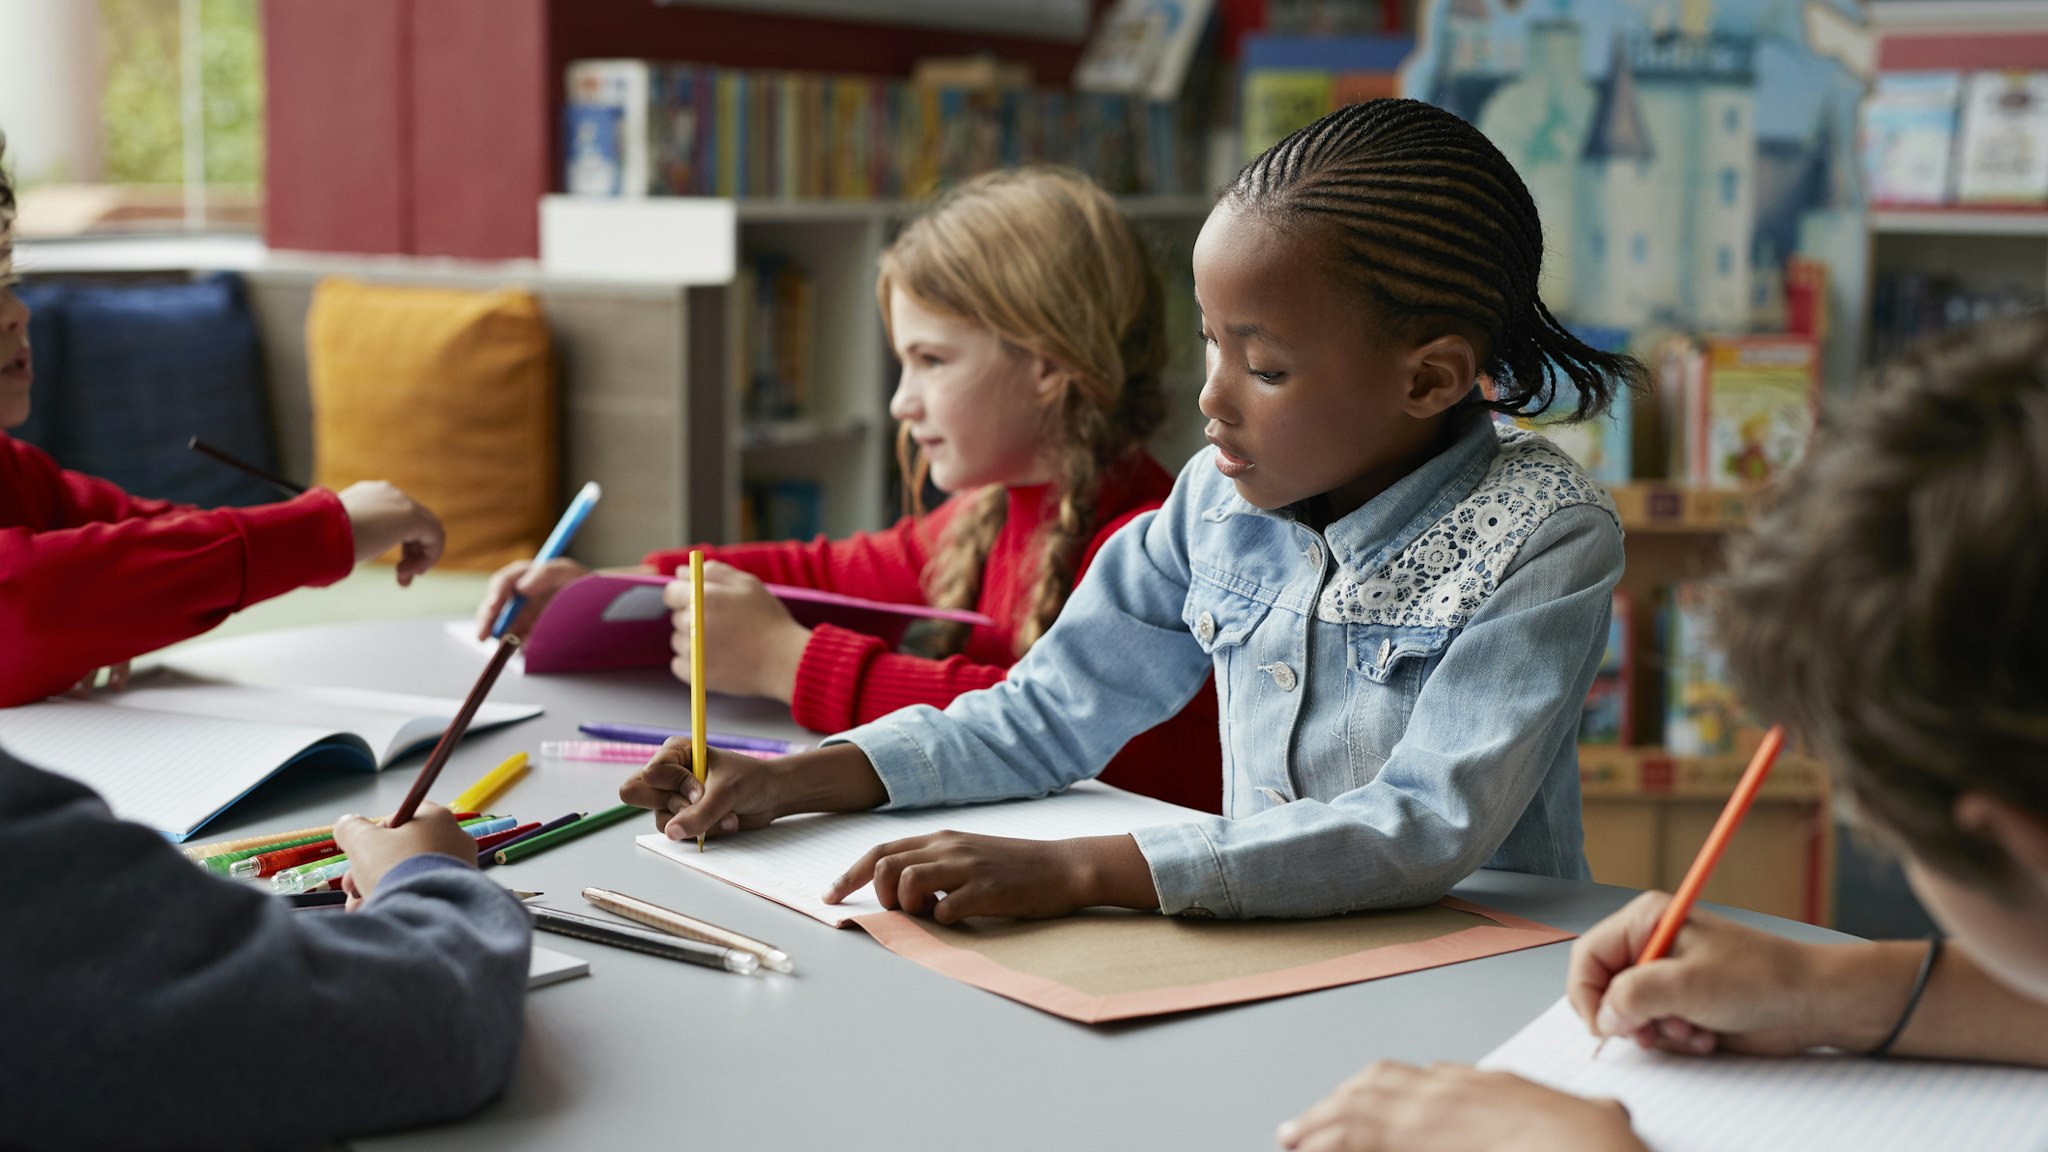 School children drawing at the school library - stock photo